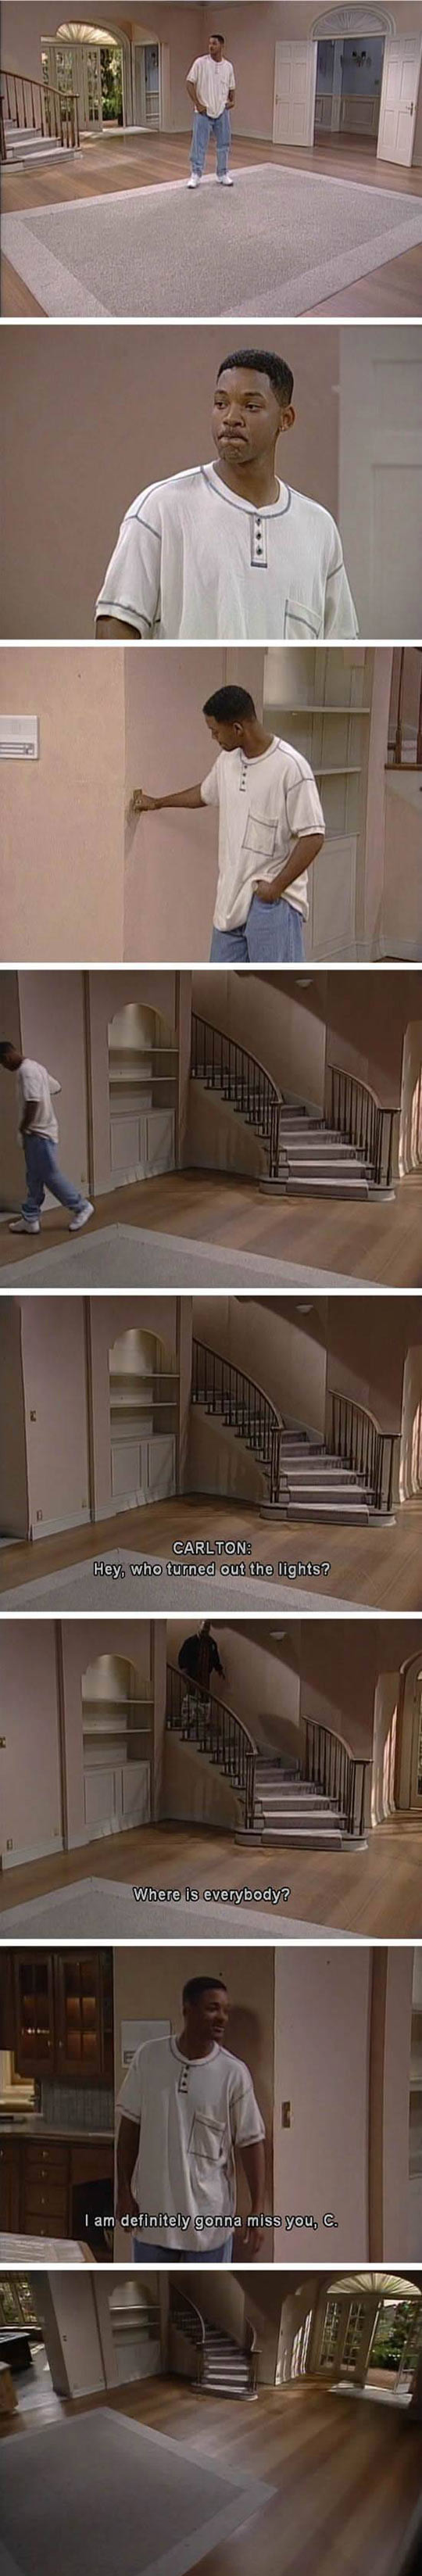 The saddest moment in The Fresh Prince…